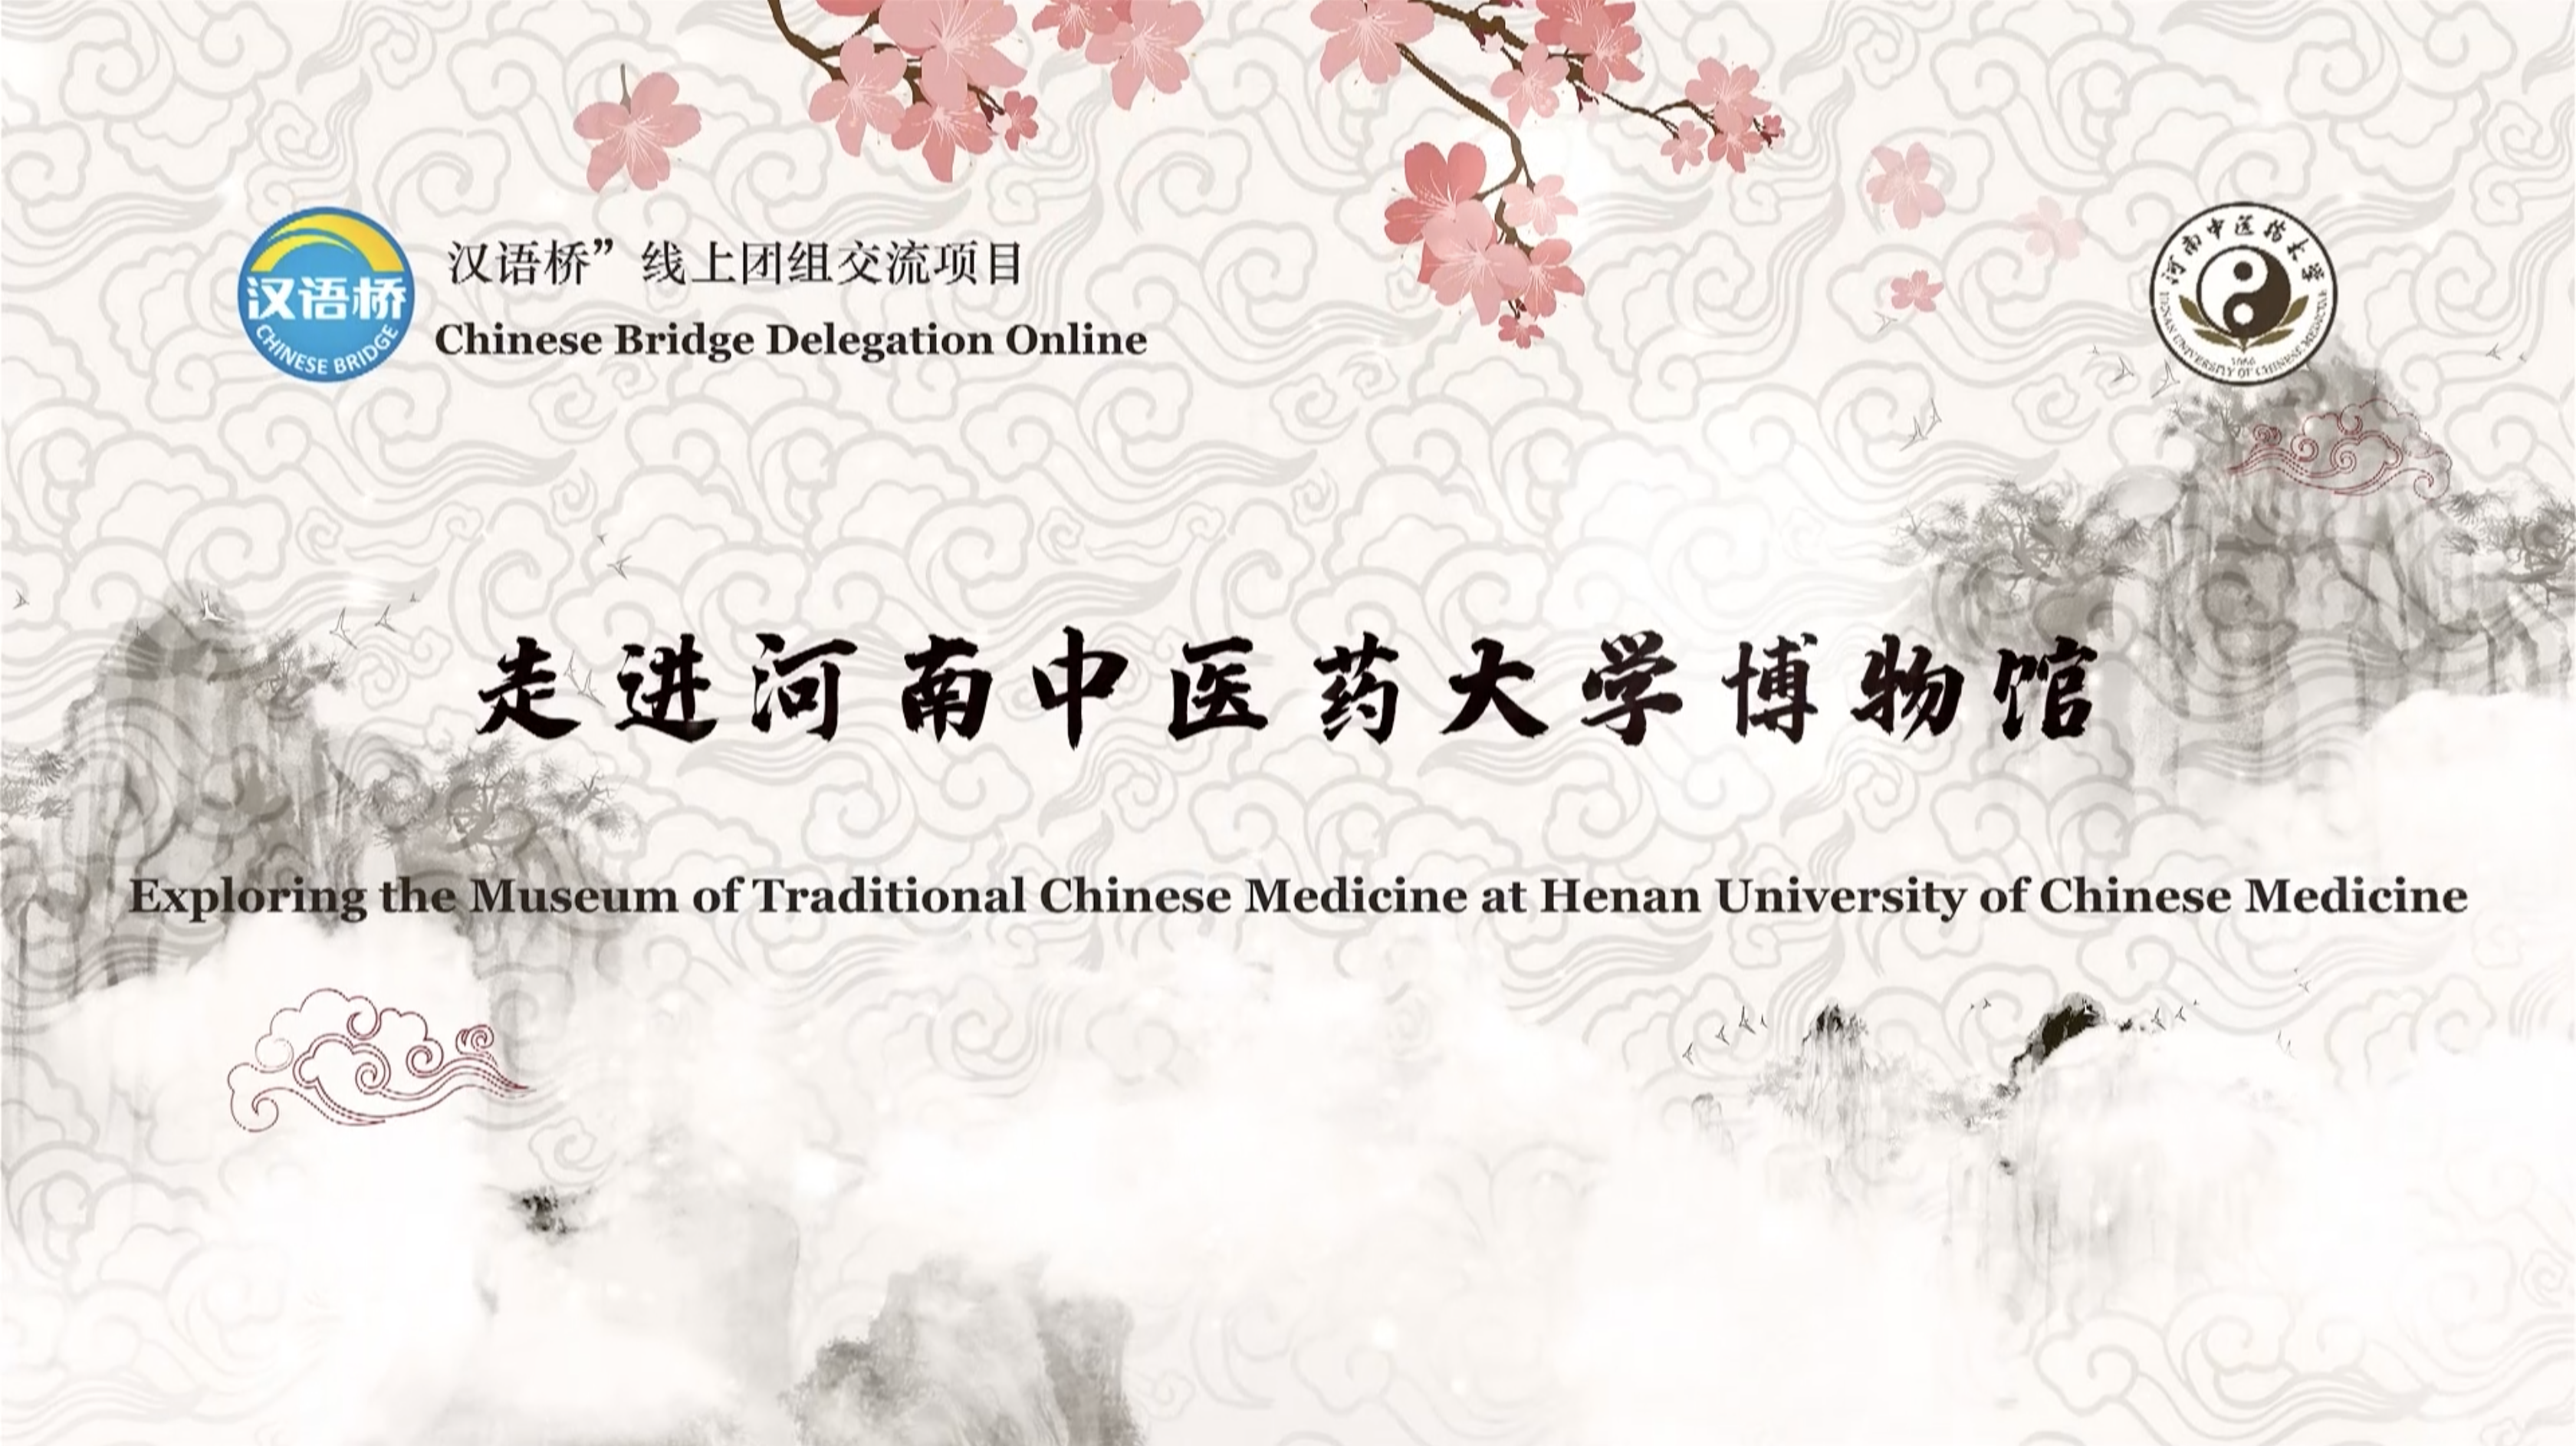 Exploring the Museum of Traditional Chinese Medicine at Henan University of Chinese Medicine